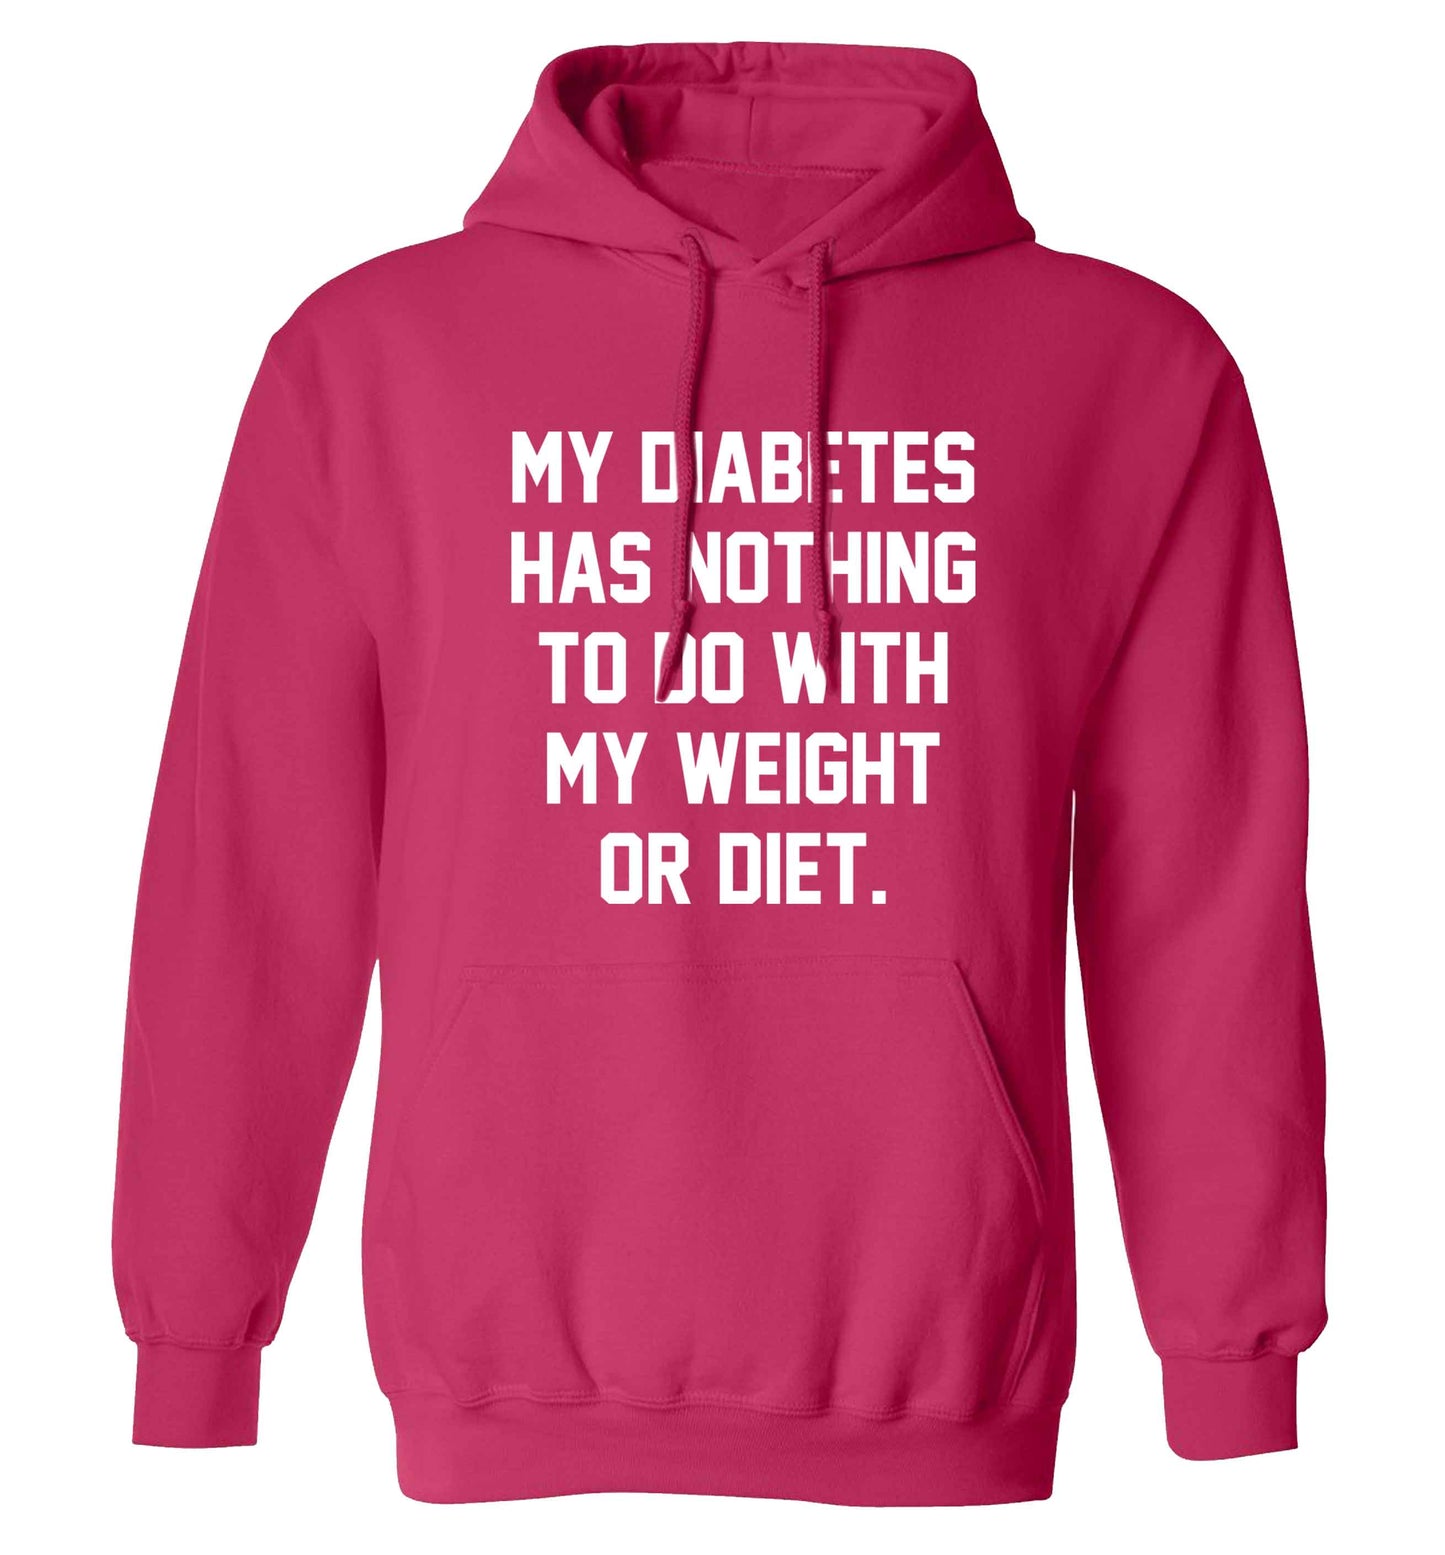 My diabetes has nothing to do with my weight or diet adults unisex pink hoodie 2XL